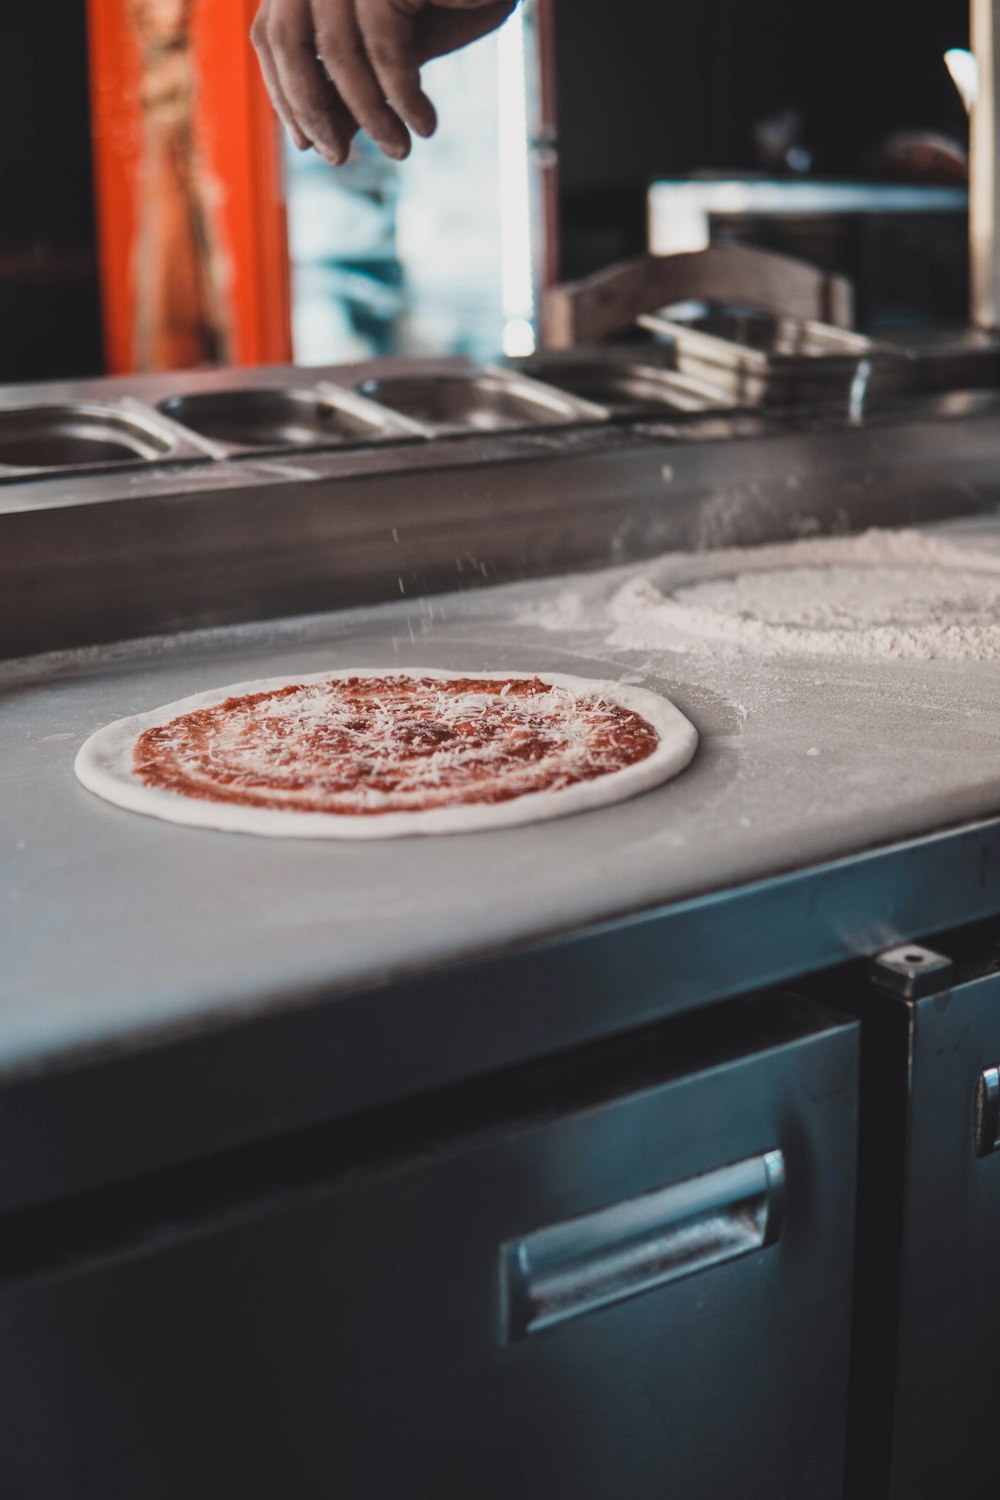 a pizza being made on a pizza stone